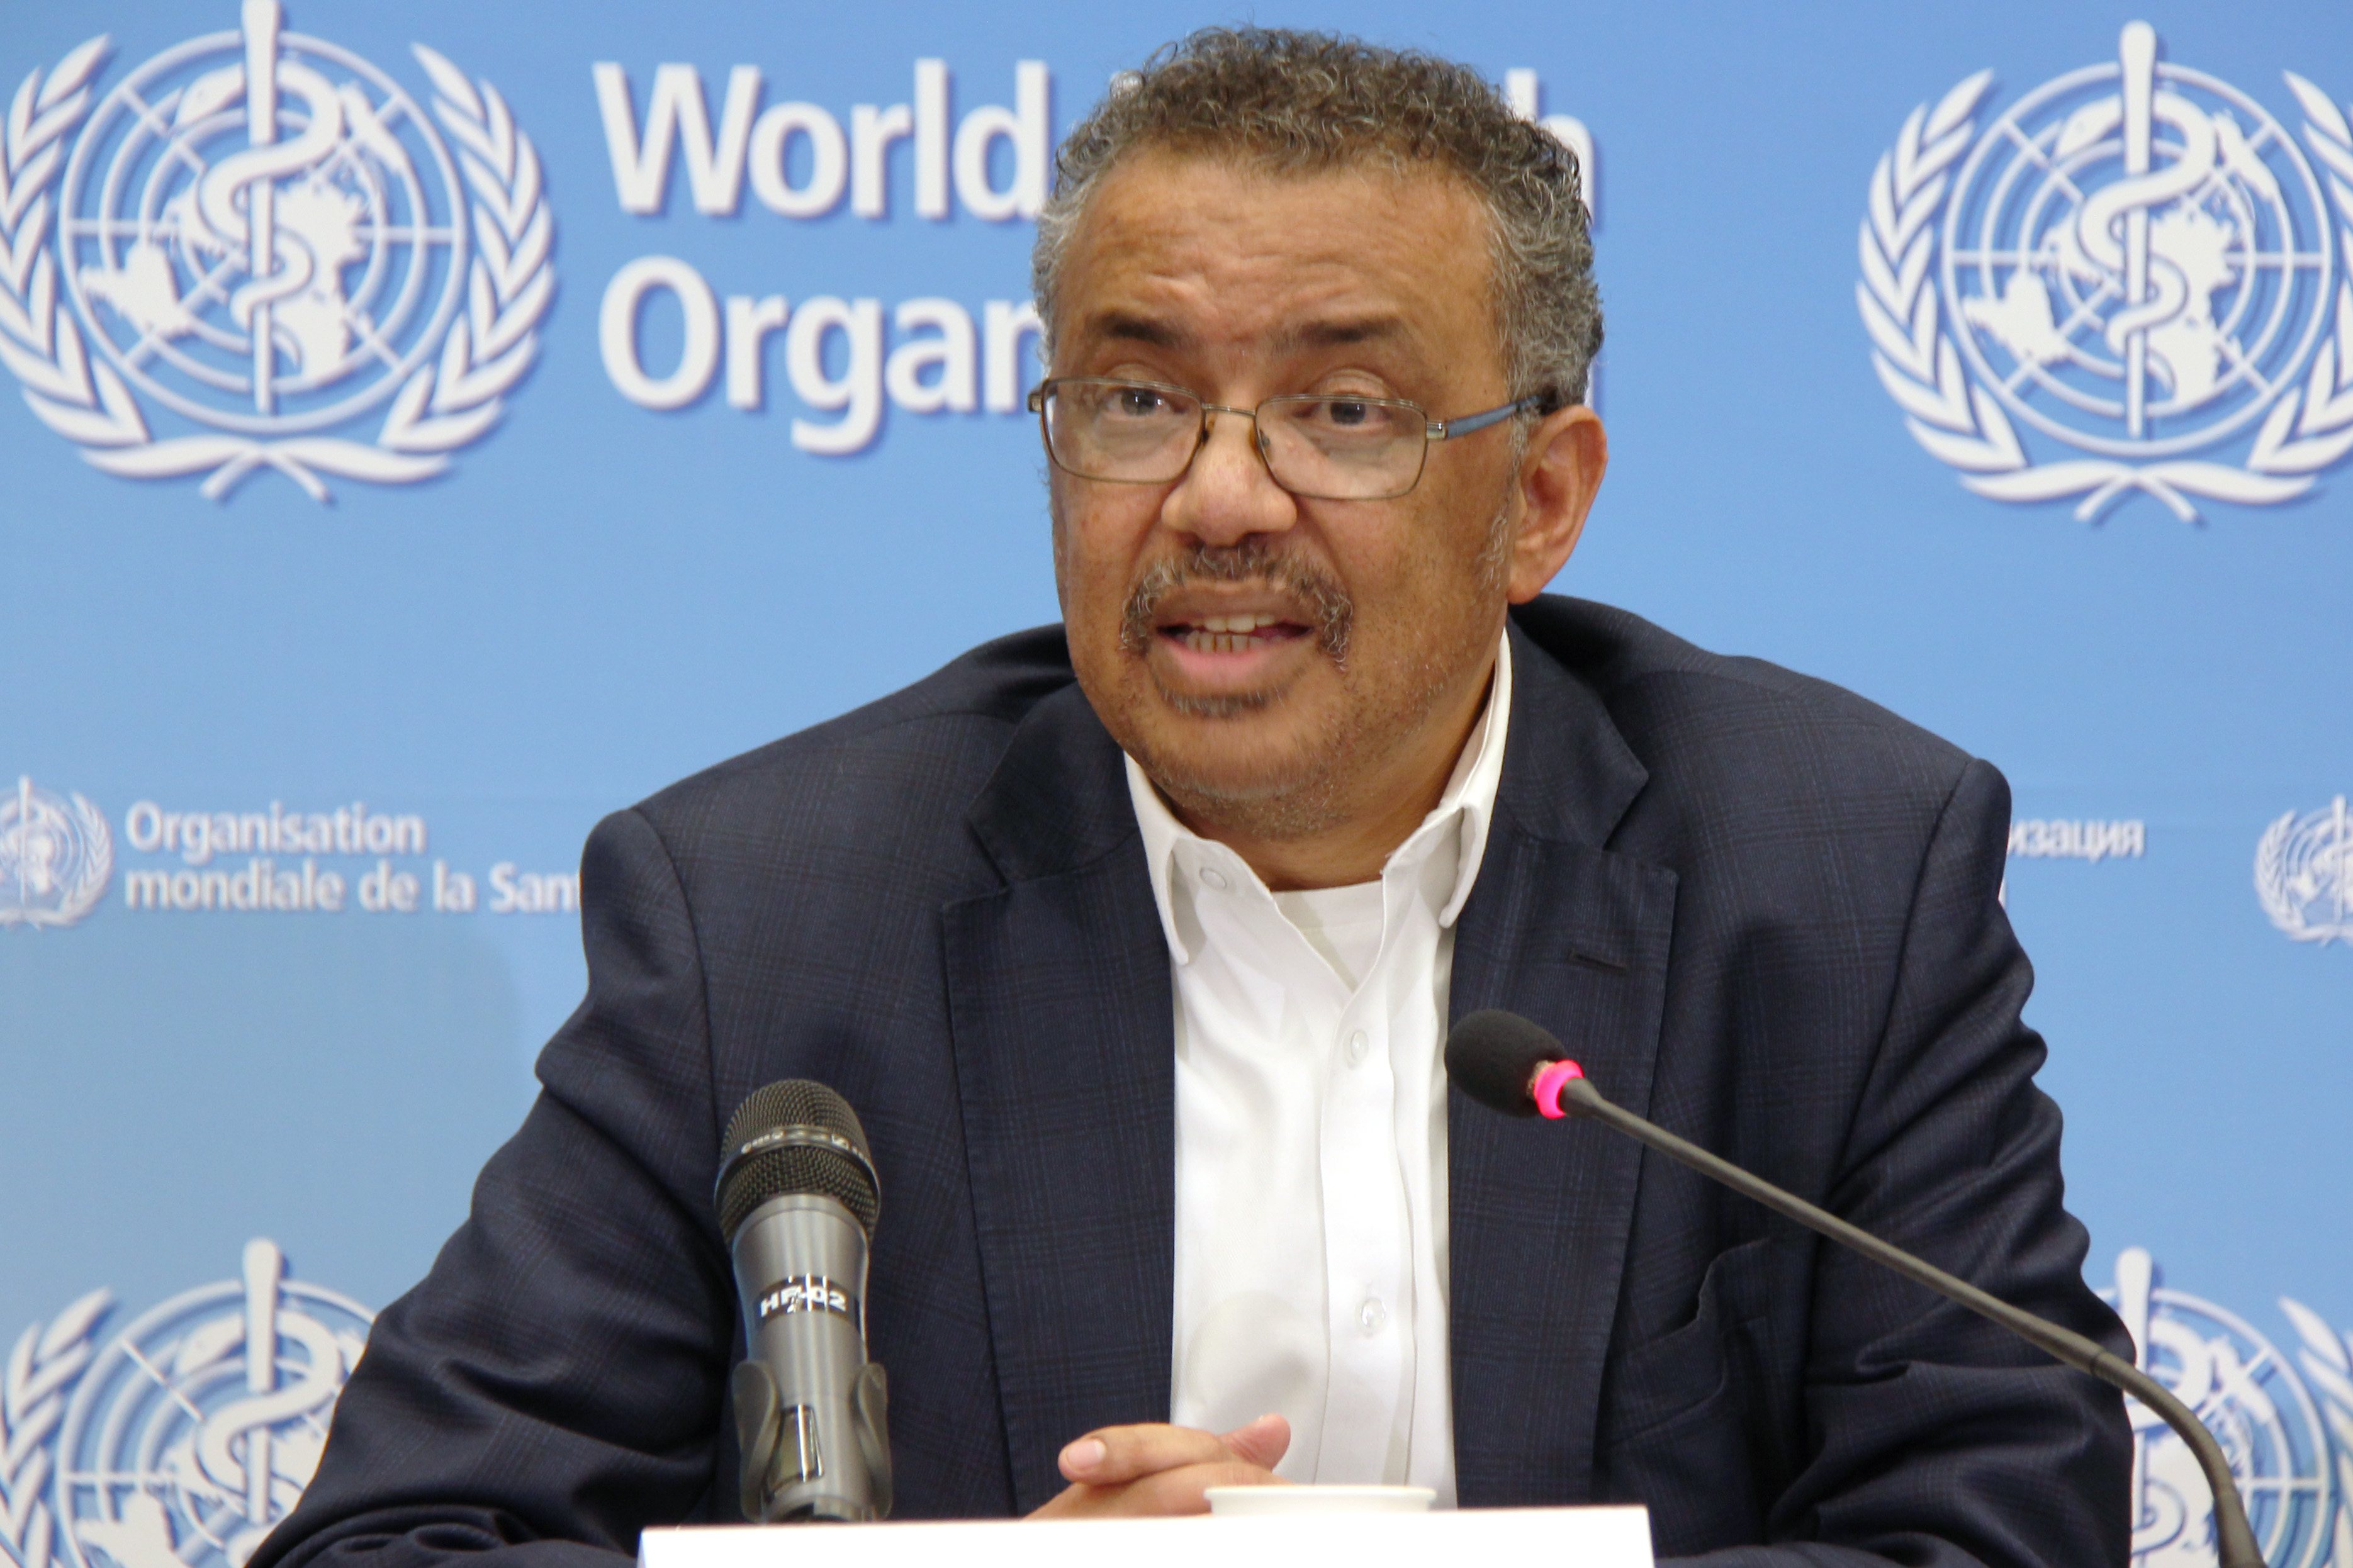 Tedros Adhanom Ghebreyesus, director-general of the World Health Organization (WHO), speaks at a press conference after the WHO emergency committee's meeting on the novel coronavirus in China at its headquarters in Geneva, Switzerland, Jan. 22, 2020. (xin